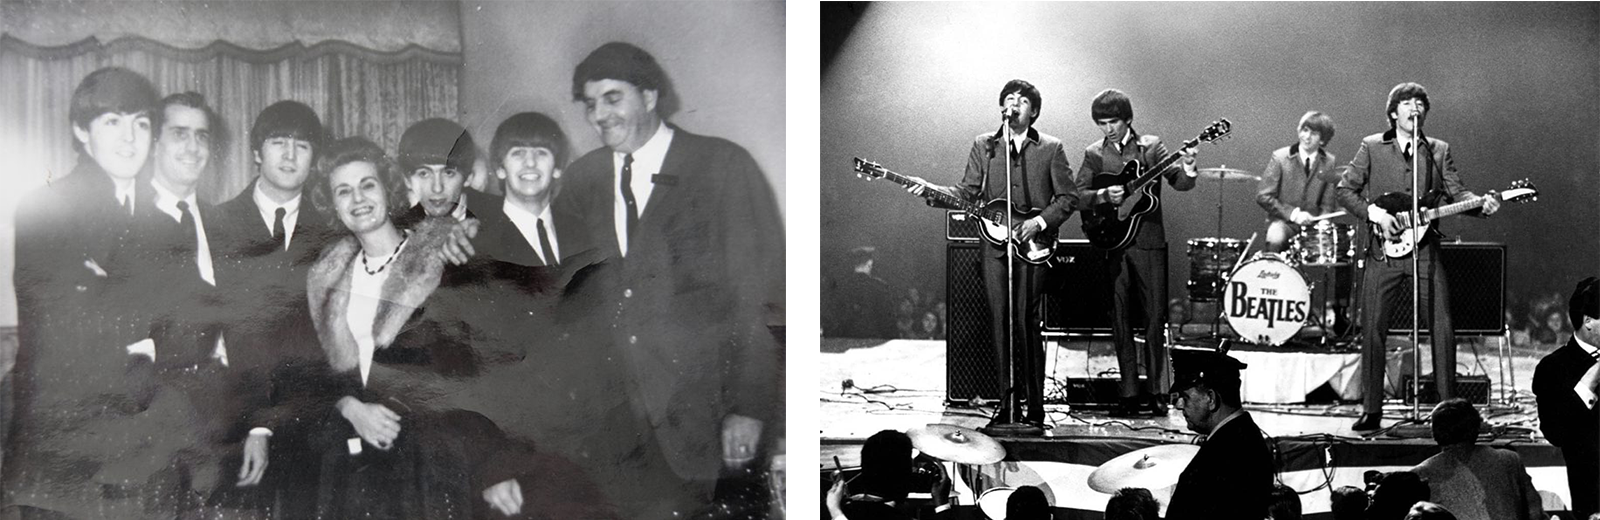 Beatles at The Shoreham and at the Coliseum